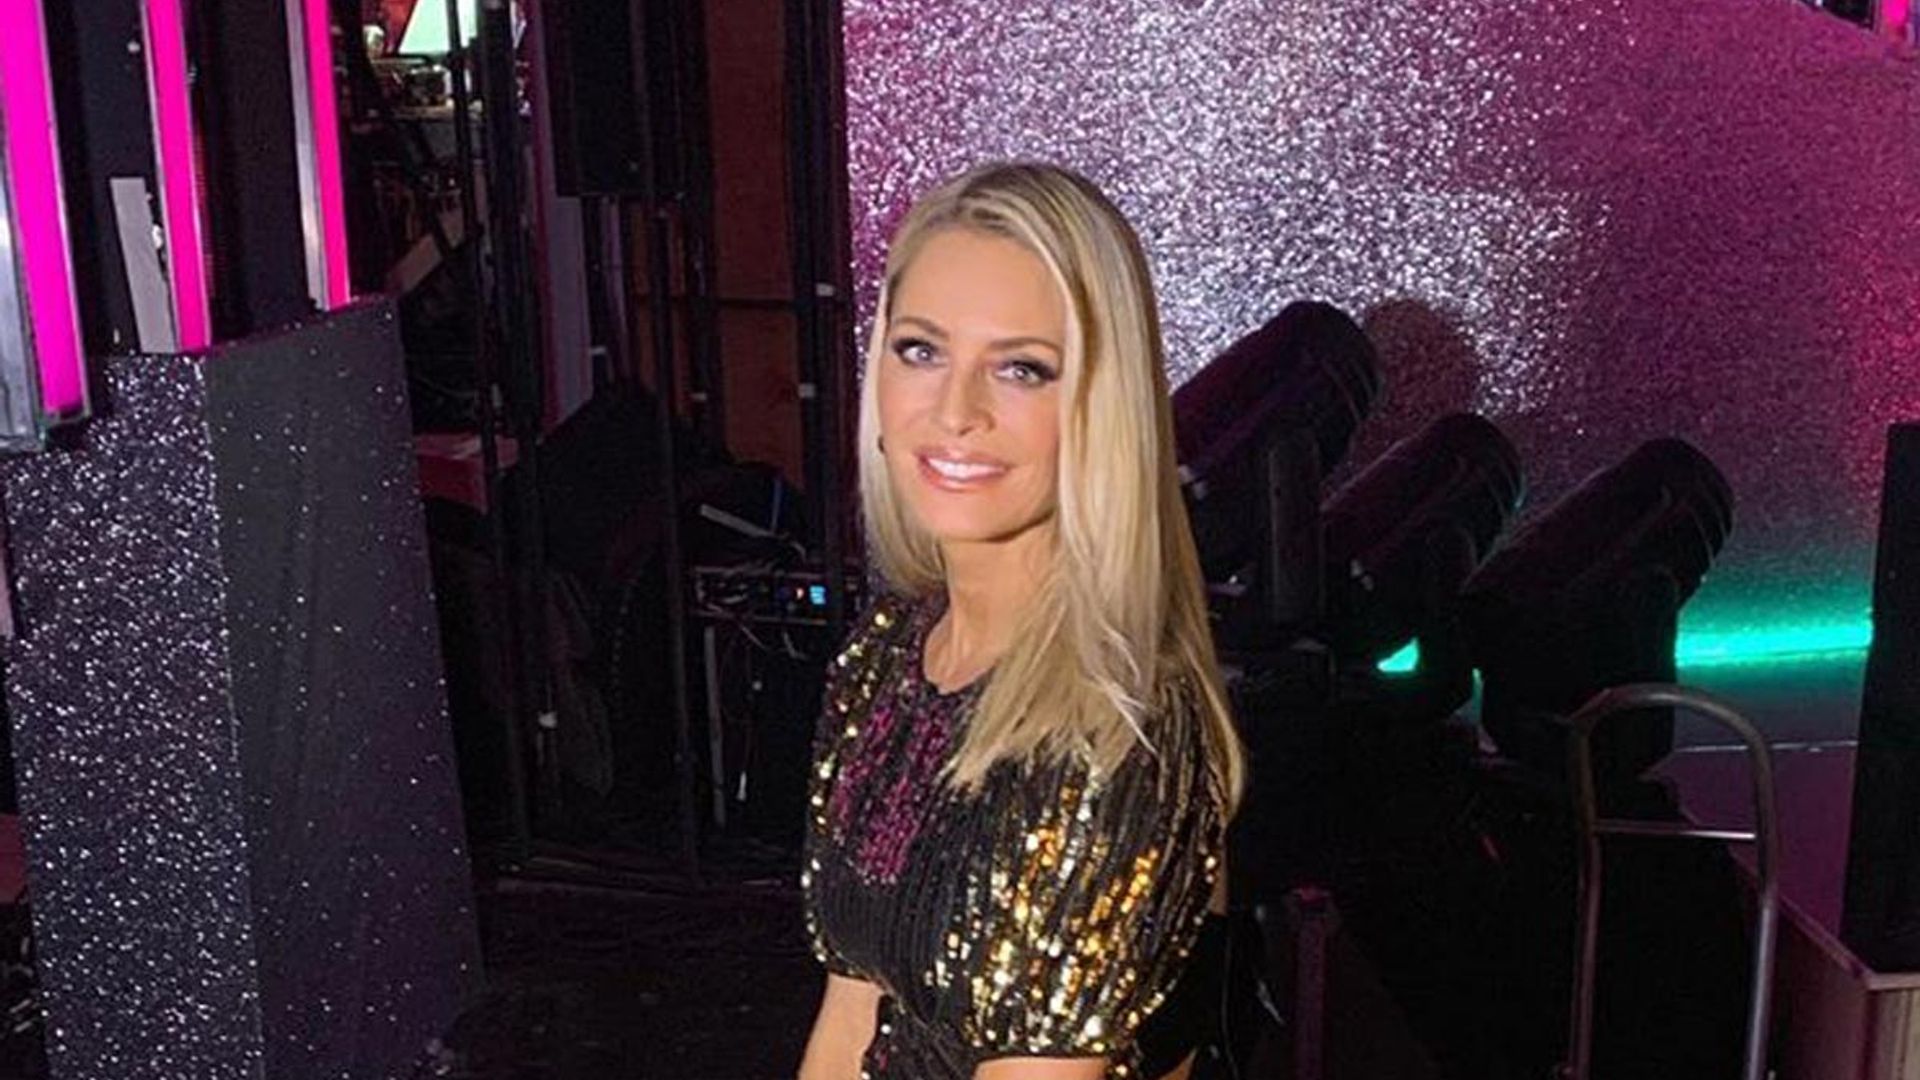 Strictly fans are swooning over Tess Daly’s Rixo sequin dress